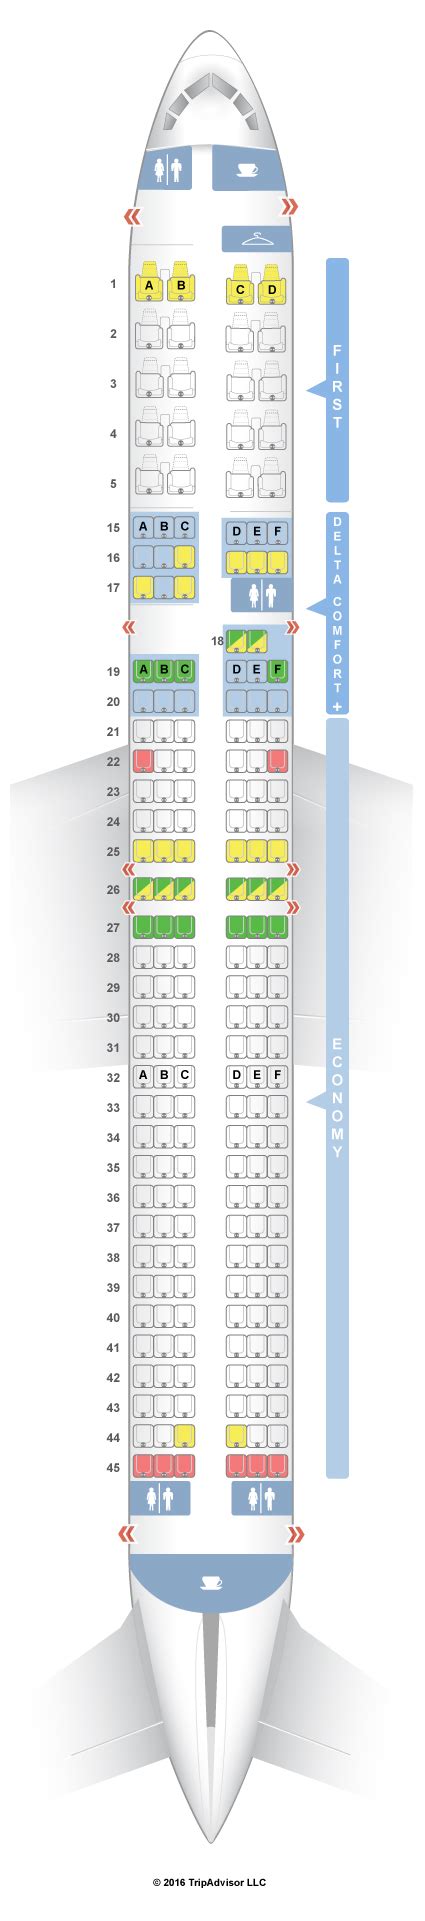 According to Delta Air Lines' site, nonstop flights between New York and Las Vegas are currently suspended and will resume on July 2. ... In Delta's single-aisle fleet, only some versions of the Boeing 757 have more first-class seats. The usual minibottle of Dasani water, blanket and flimsy pillow were at each seat. Previous slide. Next slide .... 